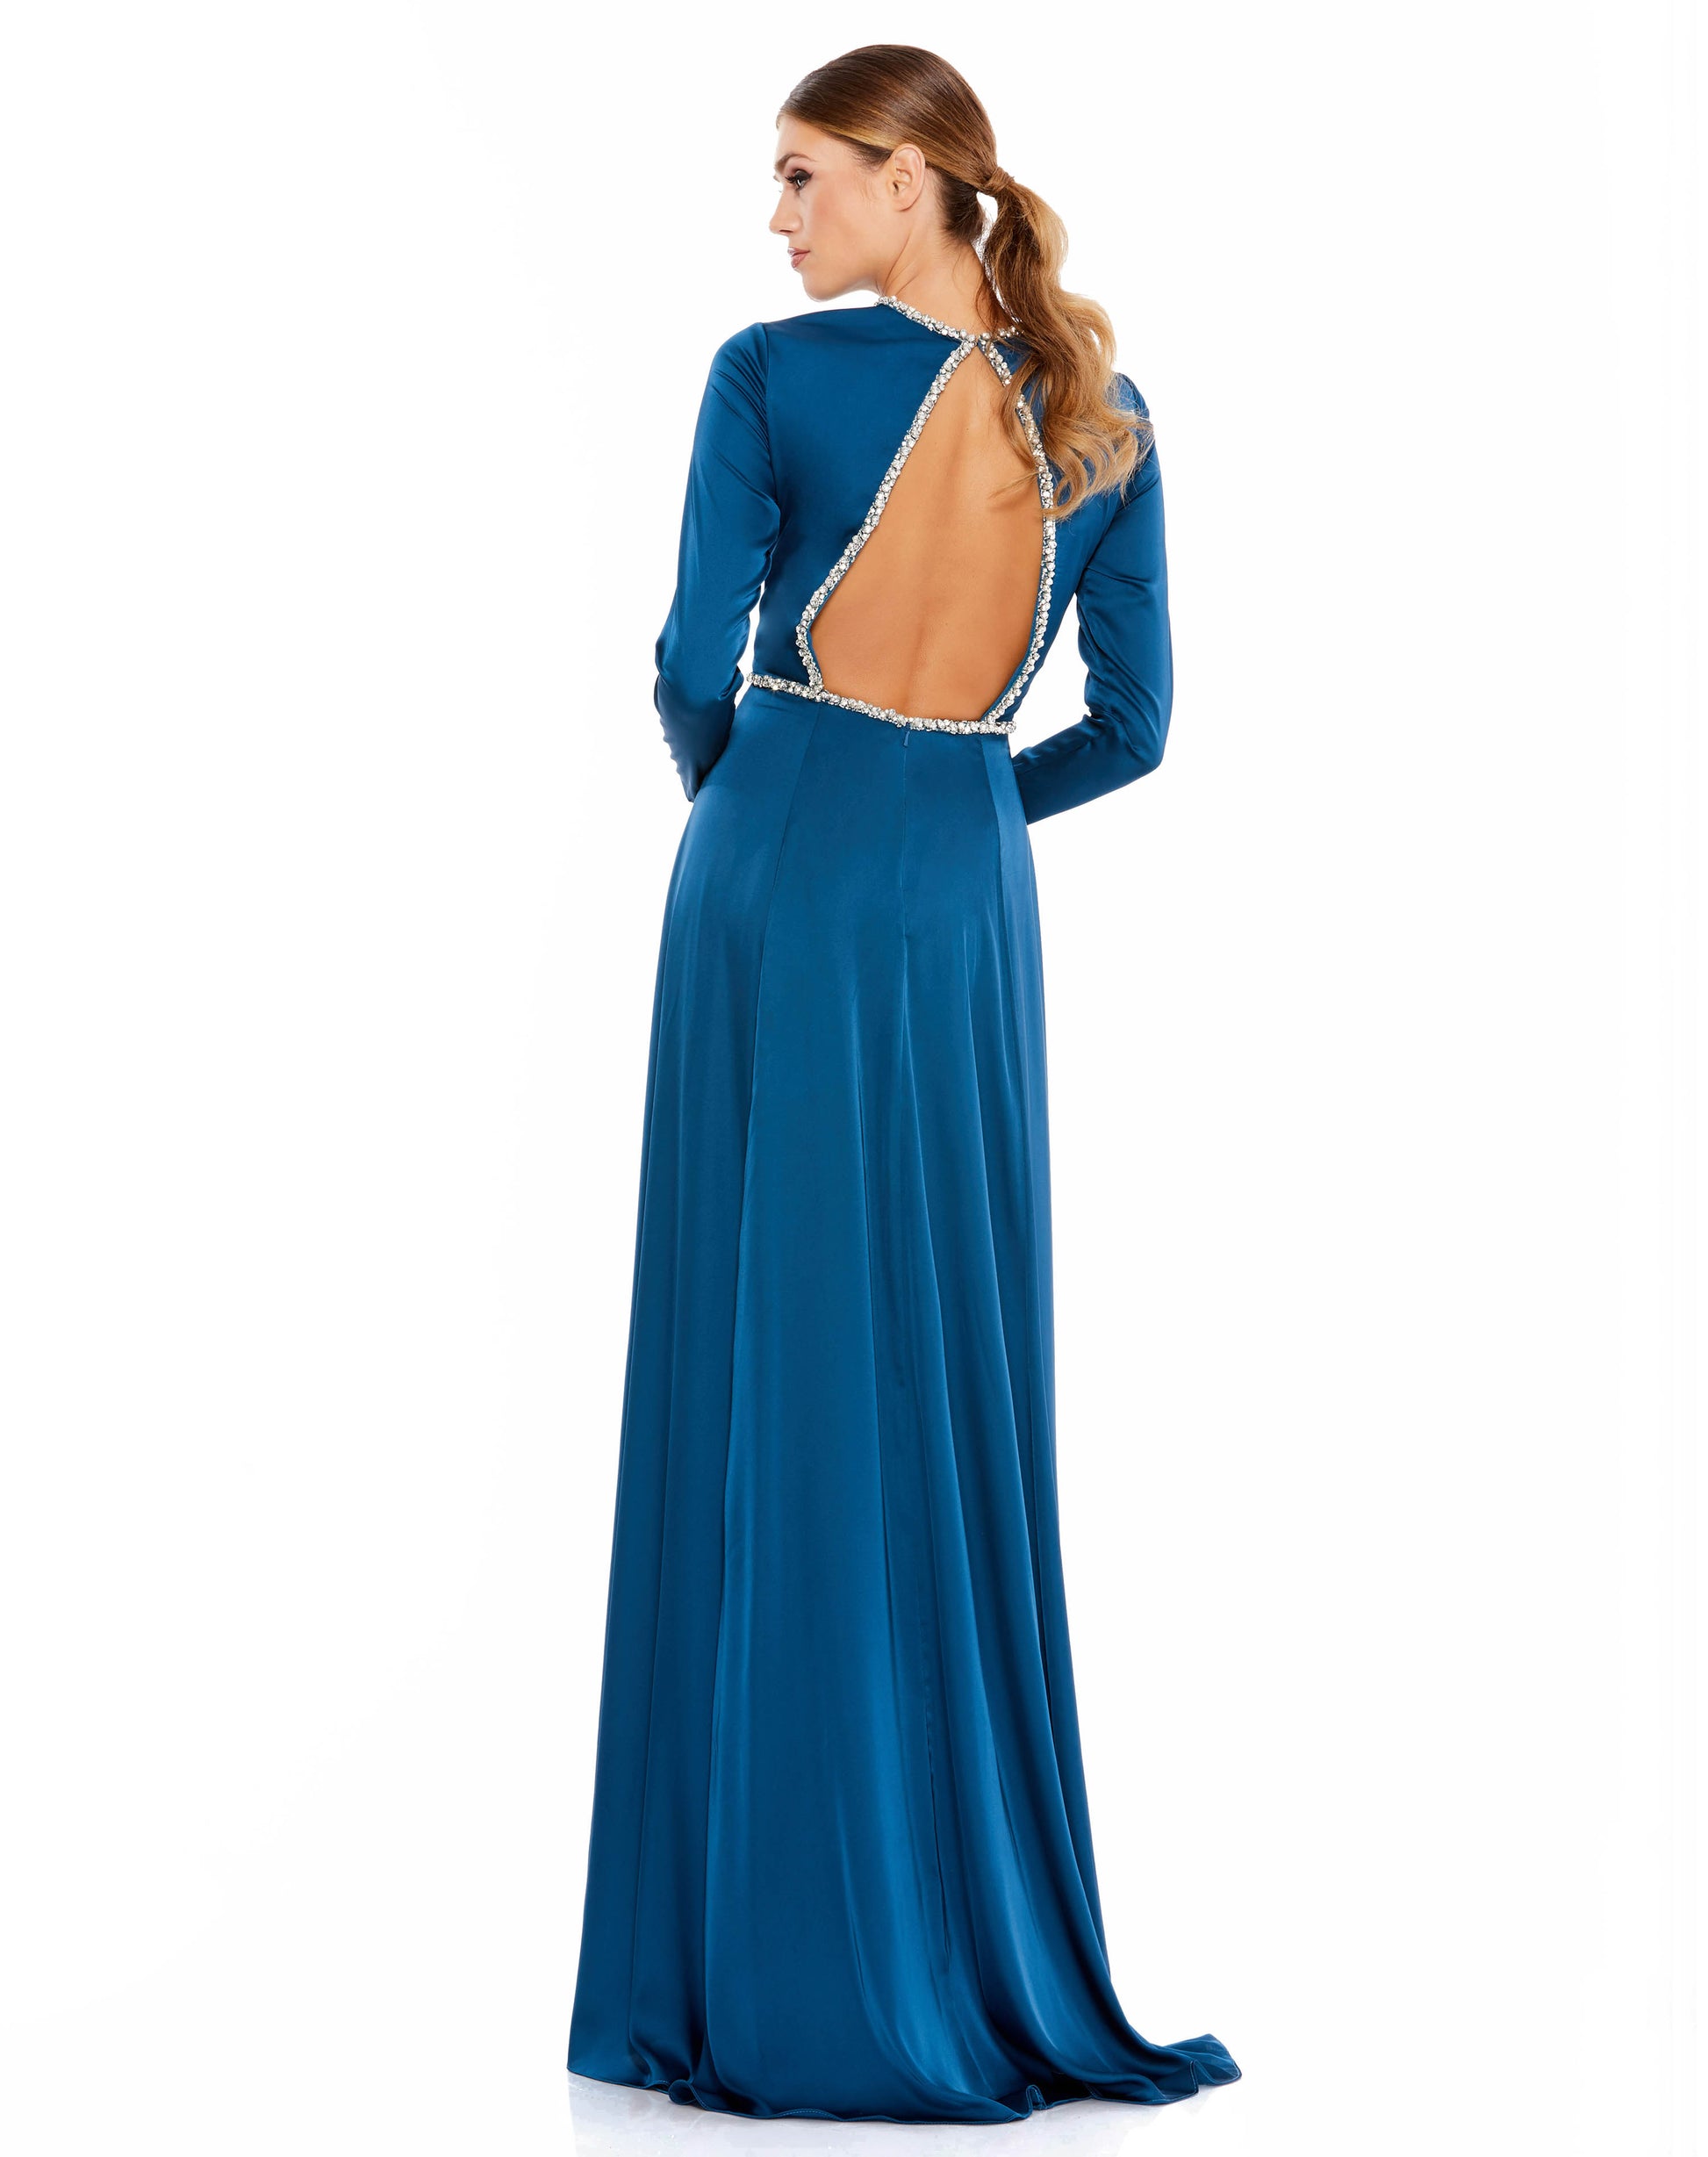 Long-sleeved charmeuse gown accented with a bejeweled belt, neckline, jewel-trimmed open back. Ieena for Mac Duggal Fully Lined Back Zipper 100% Polyester Long Sleeve Full Length High Front Slit Style #26524